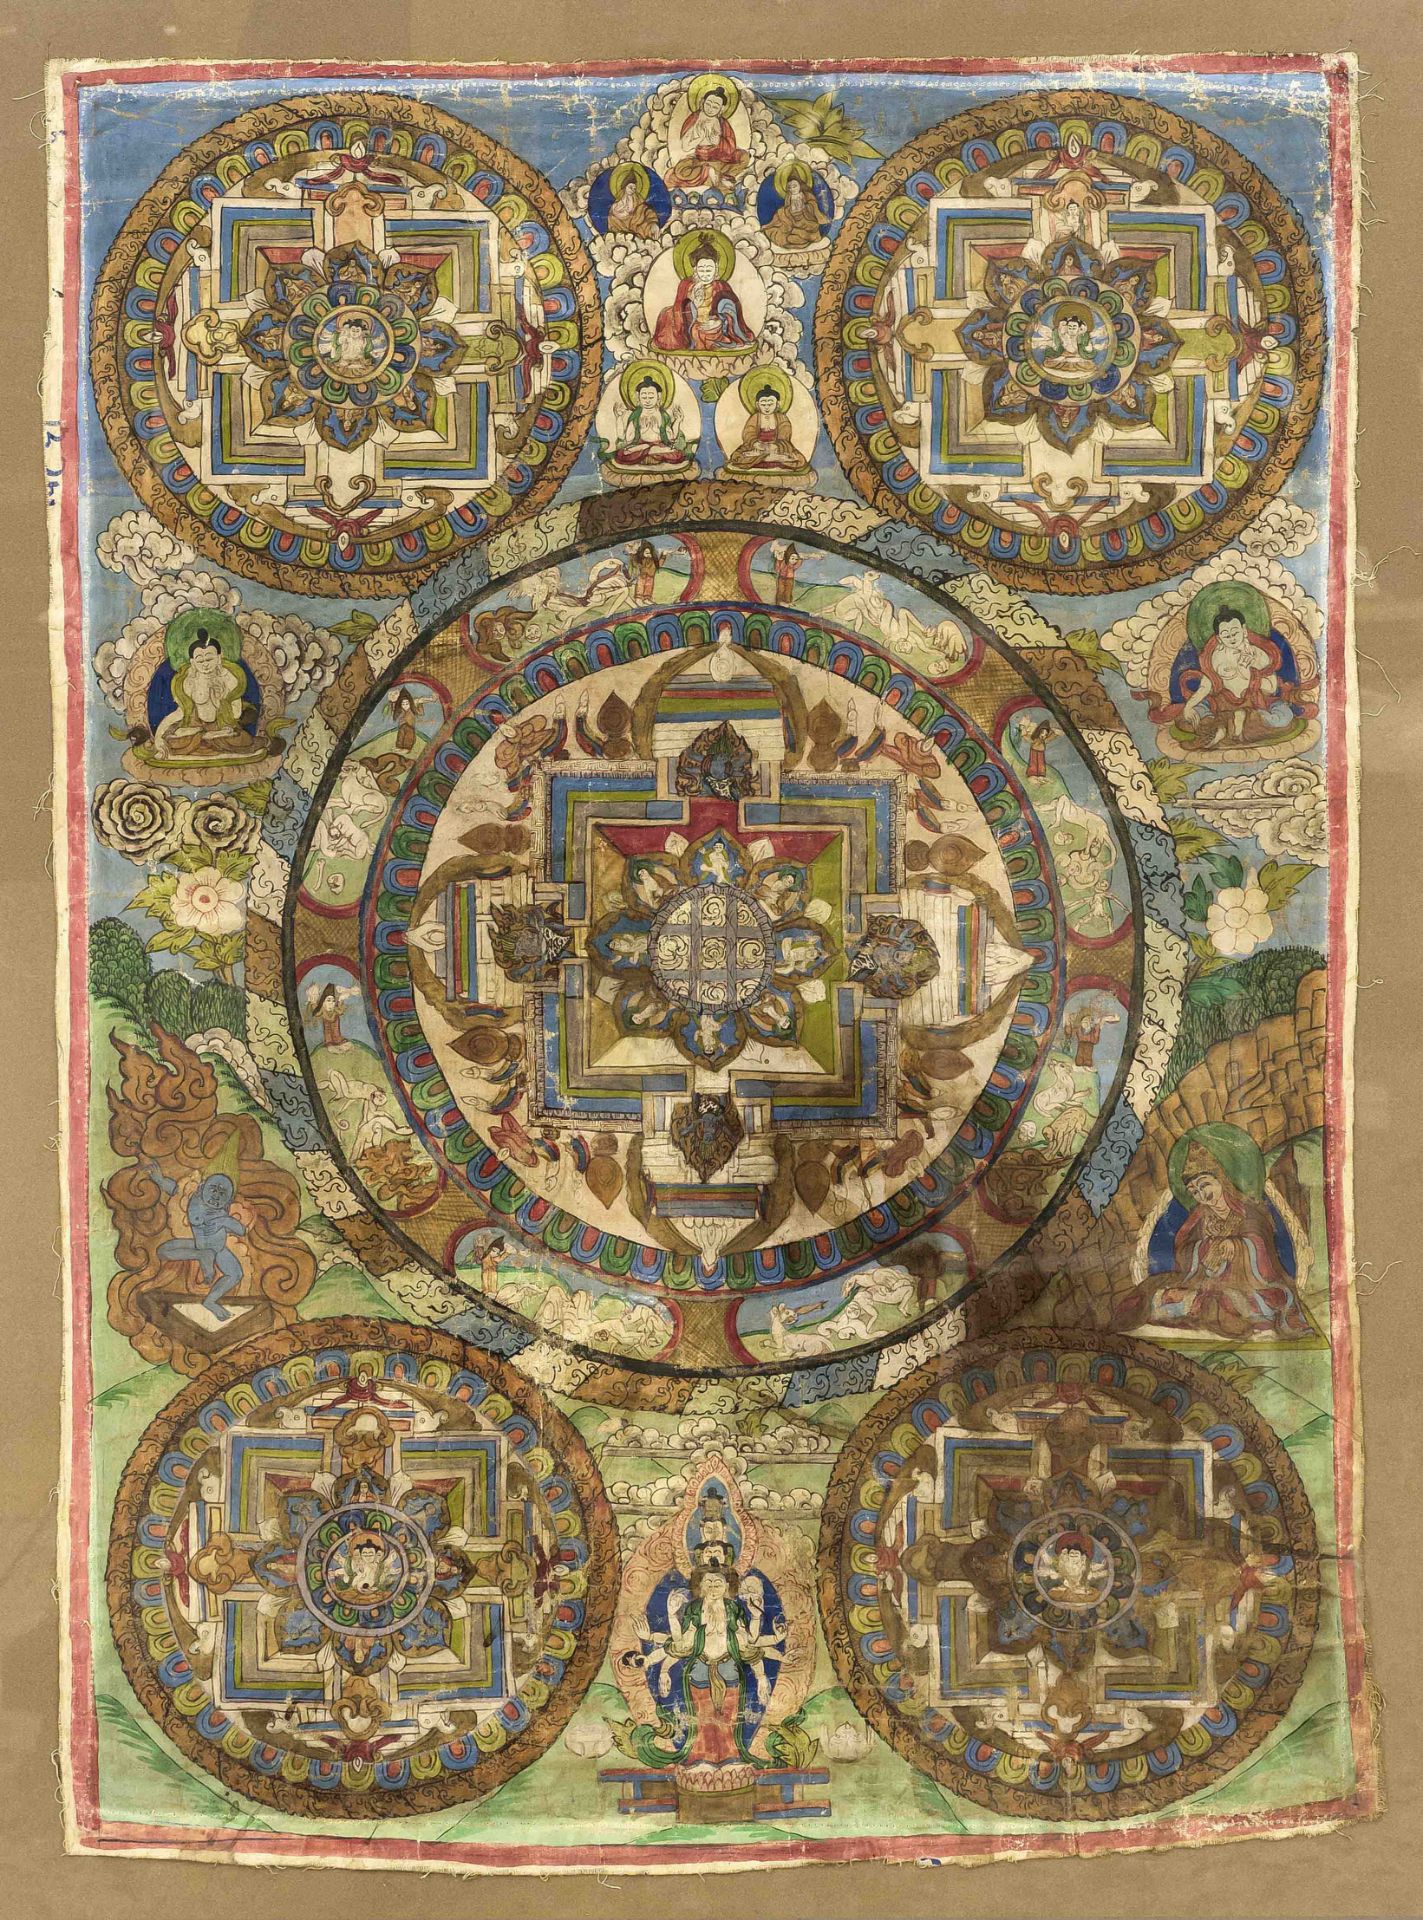 Thangka, Tibet, 19th/20th century, polychrome tempera painting on textile, traces of creasing,